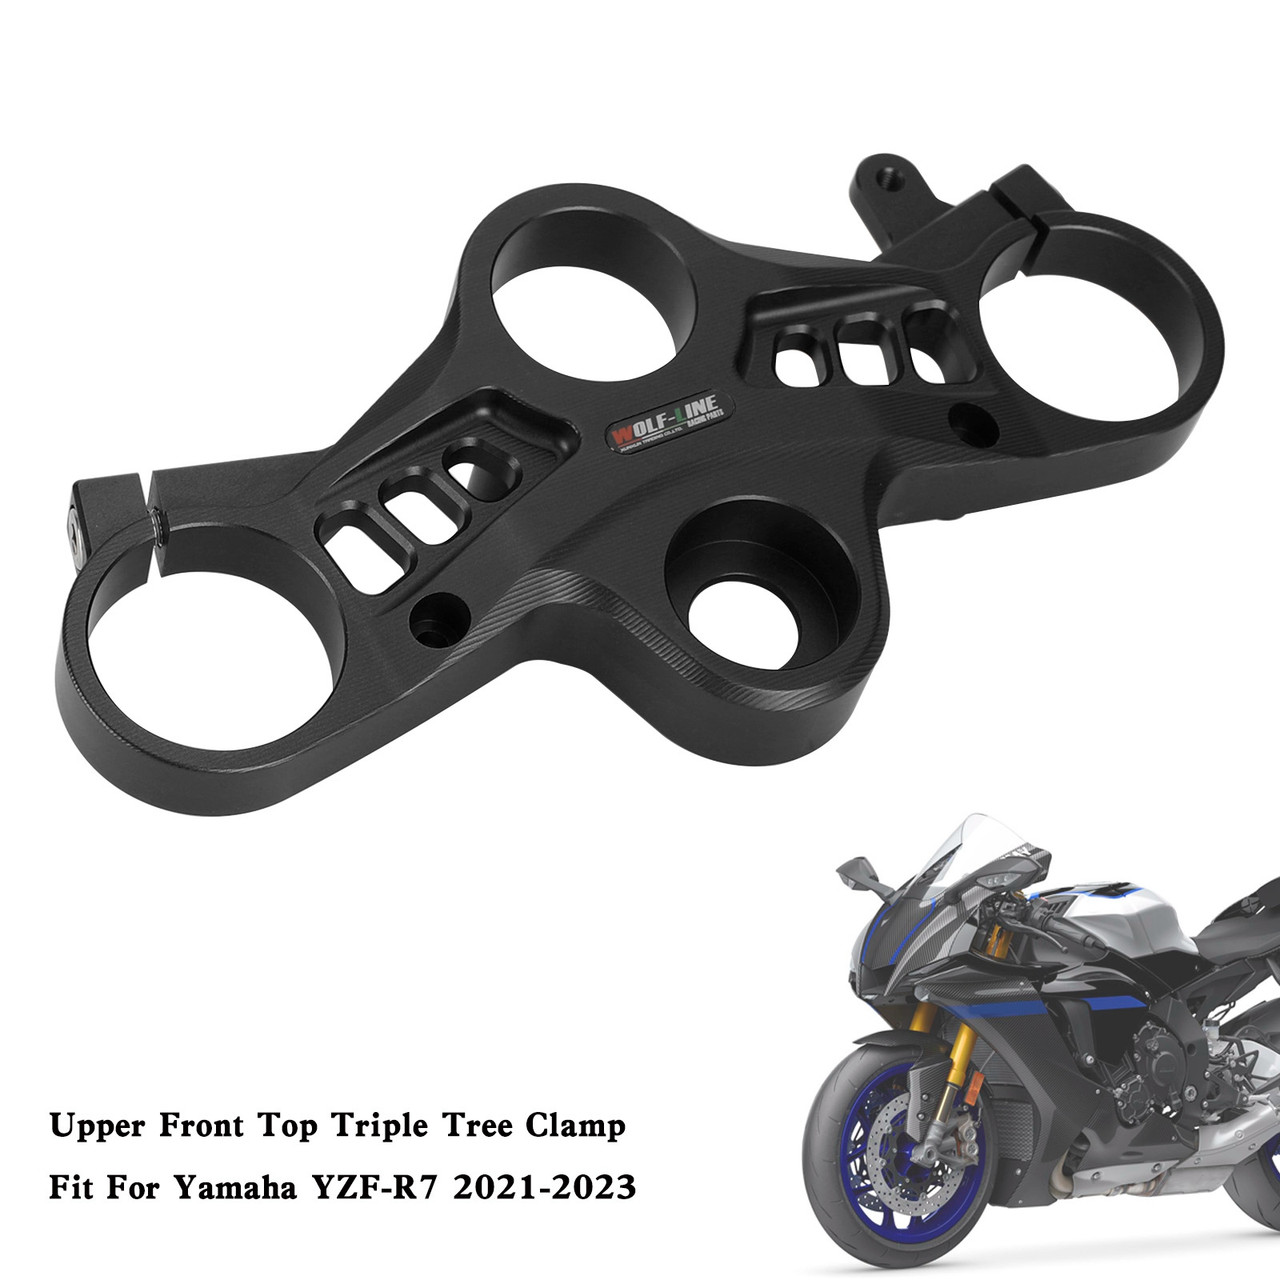 Yamaha YZF-R7 2021-2023 Upper Front Top Triple Tree Clamp